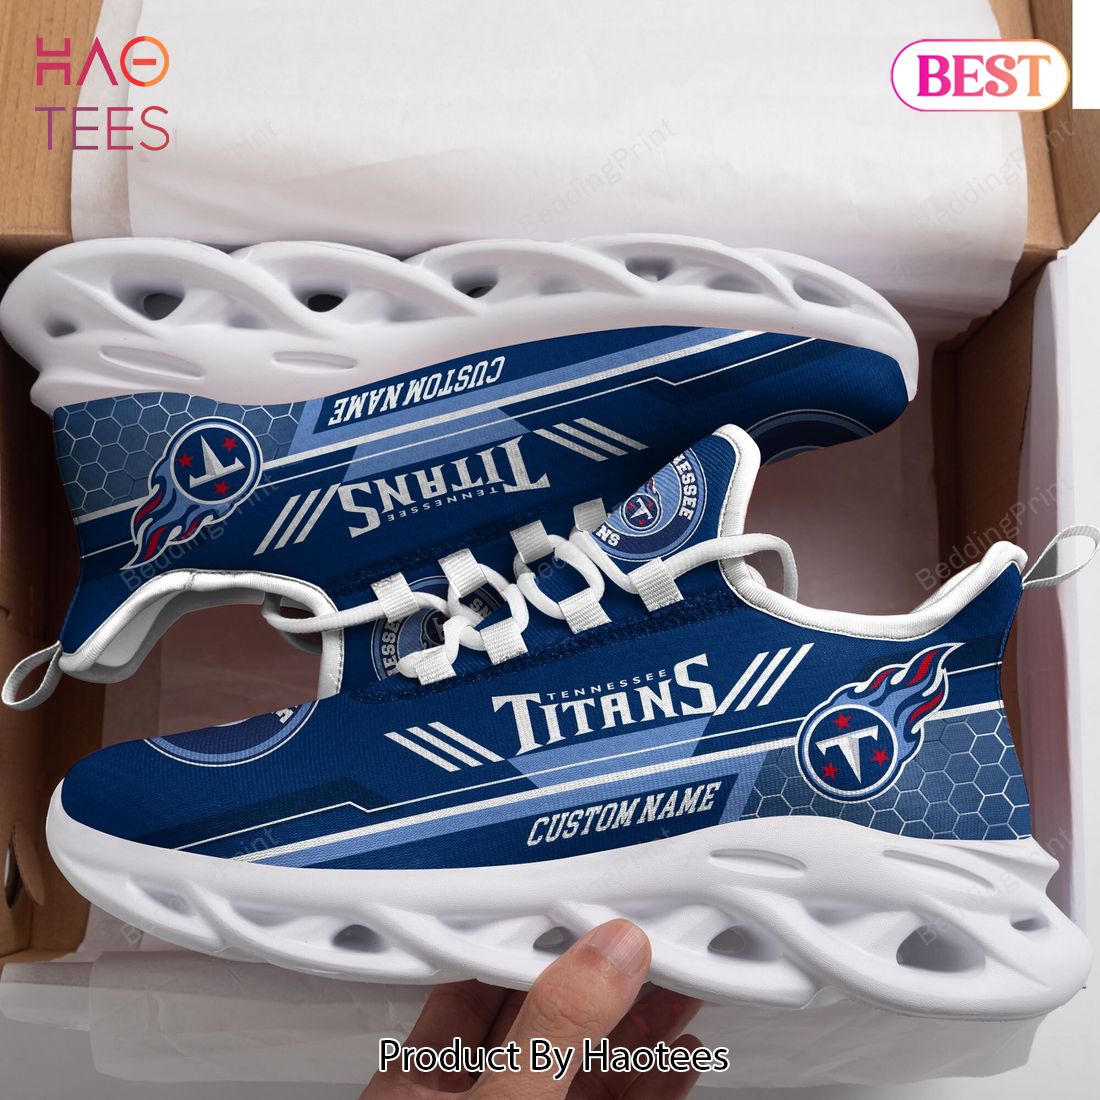 Tennessee Titans Custom Name Blue Color Max Soul Shoes